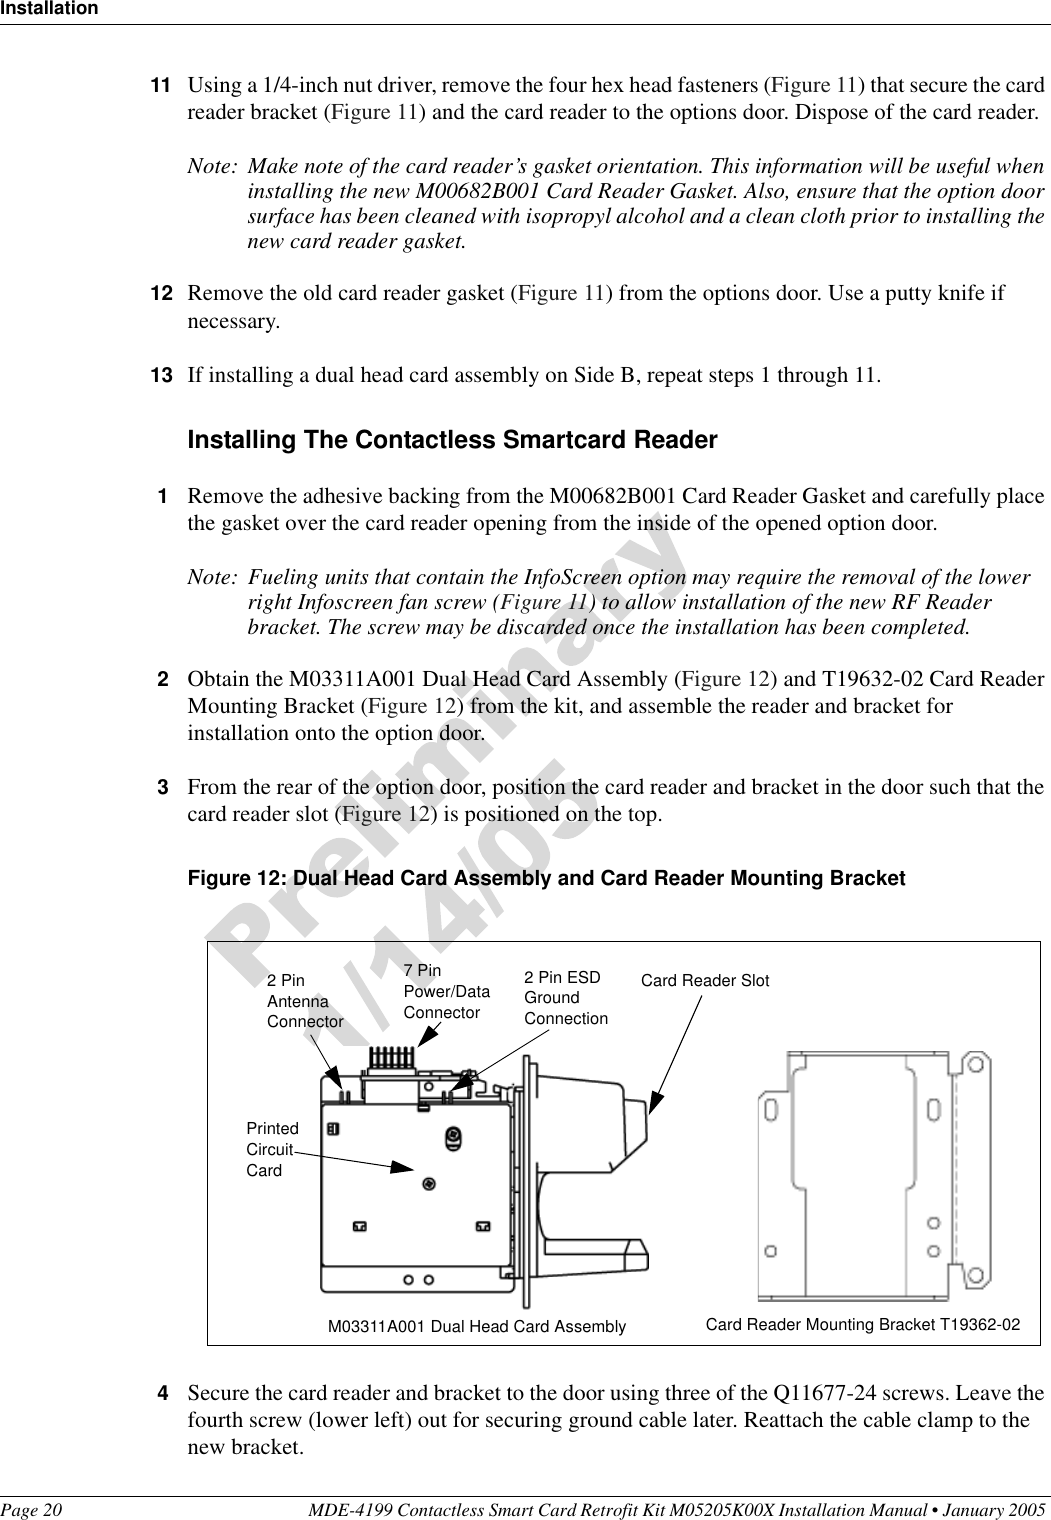 InstallationPage 20 MDE-4199 Contactless Smart Card Retrofit Kit M05205K00X Installation Manual • January 2005 11 Using a 1/4-inch nut driver, remove the four hex head fasteners (Figure 11) that secure the card reader bracket (Figure 11) and the card reader to the options door. Dispose of the card reader.Note: Make note of the card reader’s gasket orientation. This information will be useful when installing the new M00682B001 Card Reader Gasket. Also, ensure that the option door surface has been cleaned with isopropyl alcohol and a clean cloth prior to installing the new card reader gasket.12 Remove the old card reader gasket (Figure 11) from the options door. Use a putty knife if necessary.13 If installing a dual head card assembly on Side B, repeat steps 1 through 11.Installing The Contactless Smartcard Reader1Remove the adhesive backing from the M00682B001 Card Reader Gasket and carefully place the gasket over the card reader opening from the inside of the opened option door.Note: Fueling units that contain the InfoScreen option may require the removal of the lower right Infoscreen fan screw (Figure 11) to allow installation of the new RF Reader bracket. The screw may be discarded once the installation has been completed.2Obtain the M03311A001 Dual Head Card Assembly (Figure 12) and T19632-02 Card Reader Mounting Bracket (Figure 12) from the kit, and assemble the reader and bracket for installation onto the option door.3From the rear of the option door, position the card reader and bracket in the door such that the card reader slot (Figure 12) is positioned on the top.Figure 12: Dual Head Card Assembly and Card Reader Mounting Bracket4Secure the card reader and bracket to the door using three of the Q11677-24 screws. Leave the fourth screw (lower left) out for securing ground cable later. Reattach the cable clamp to the new bracket.Card Reader SlotM03311A001 Dual Head Card Assembly Card Reader Mounting Bracket T19362-02Printed Circuit Card2 Pin Antenna Connector7 Pin Power/Data Connector2 Pin ESD Ground Connection